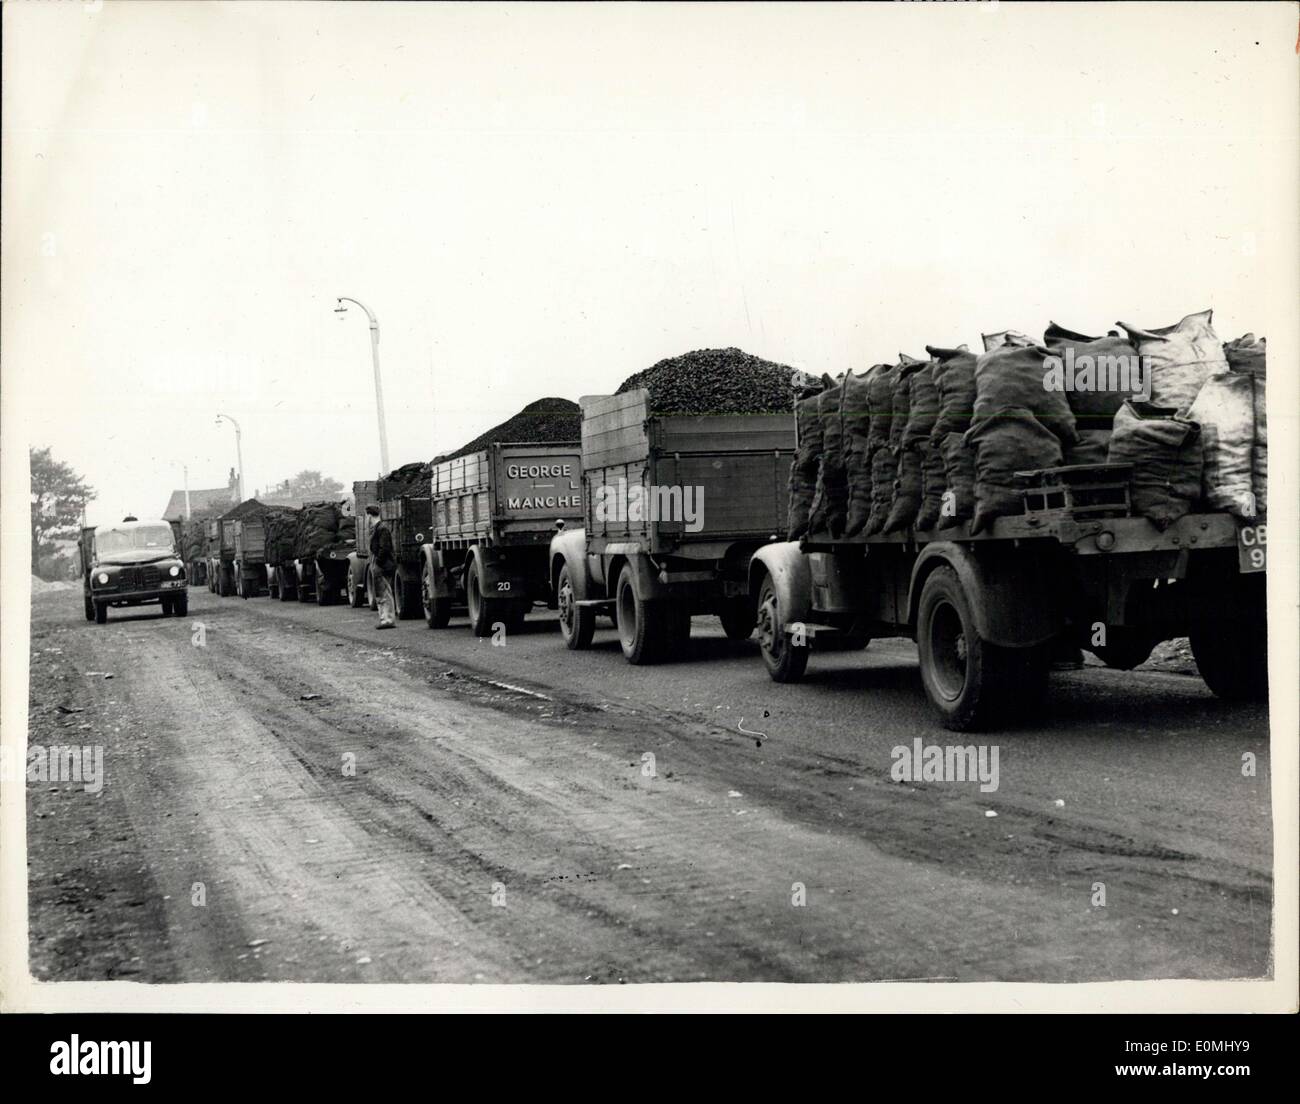 Jun. 06, 1955 - The rail Strike..How The Coal Is Kept Moving.. Lorries Come To To The Rescue: Many industries throughout the country are being affected b the rail strike - and not least is the coal industry.. In many parts of the country - lorries are being used to move the coal. Photo Shows Lorries - loaded with coal ready to move off from the Astley Green Colliery - Lancashire. Stock Photo